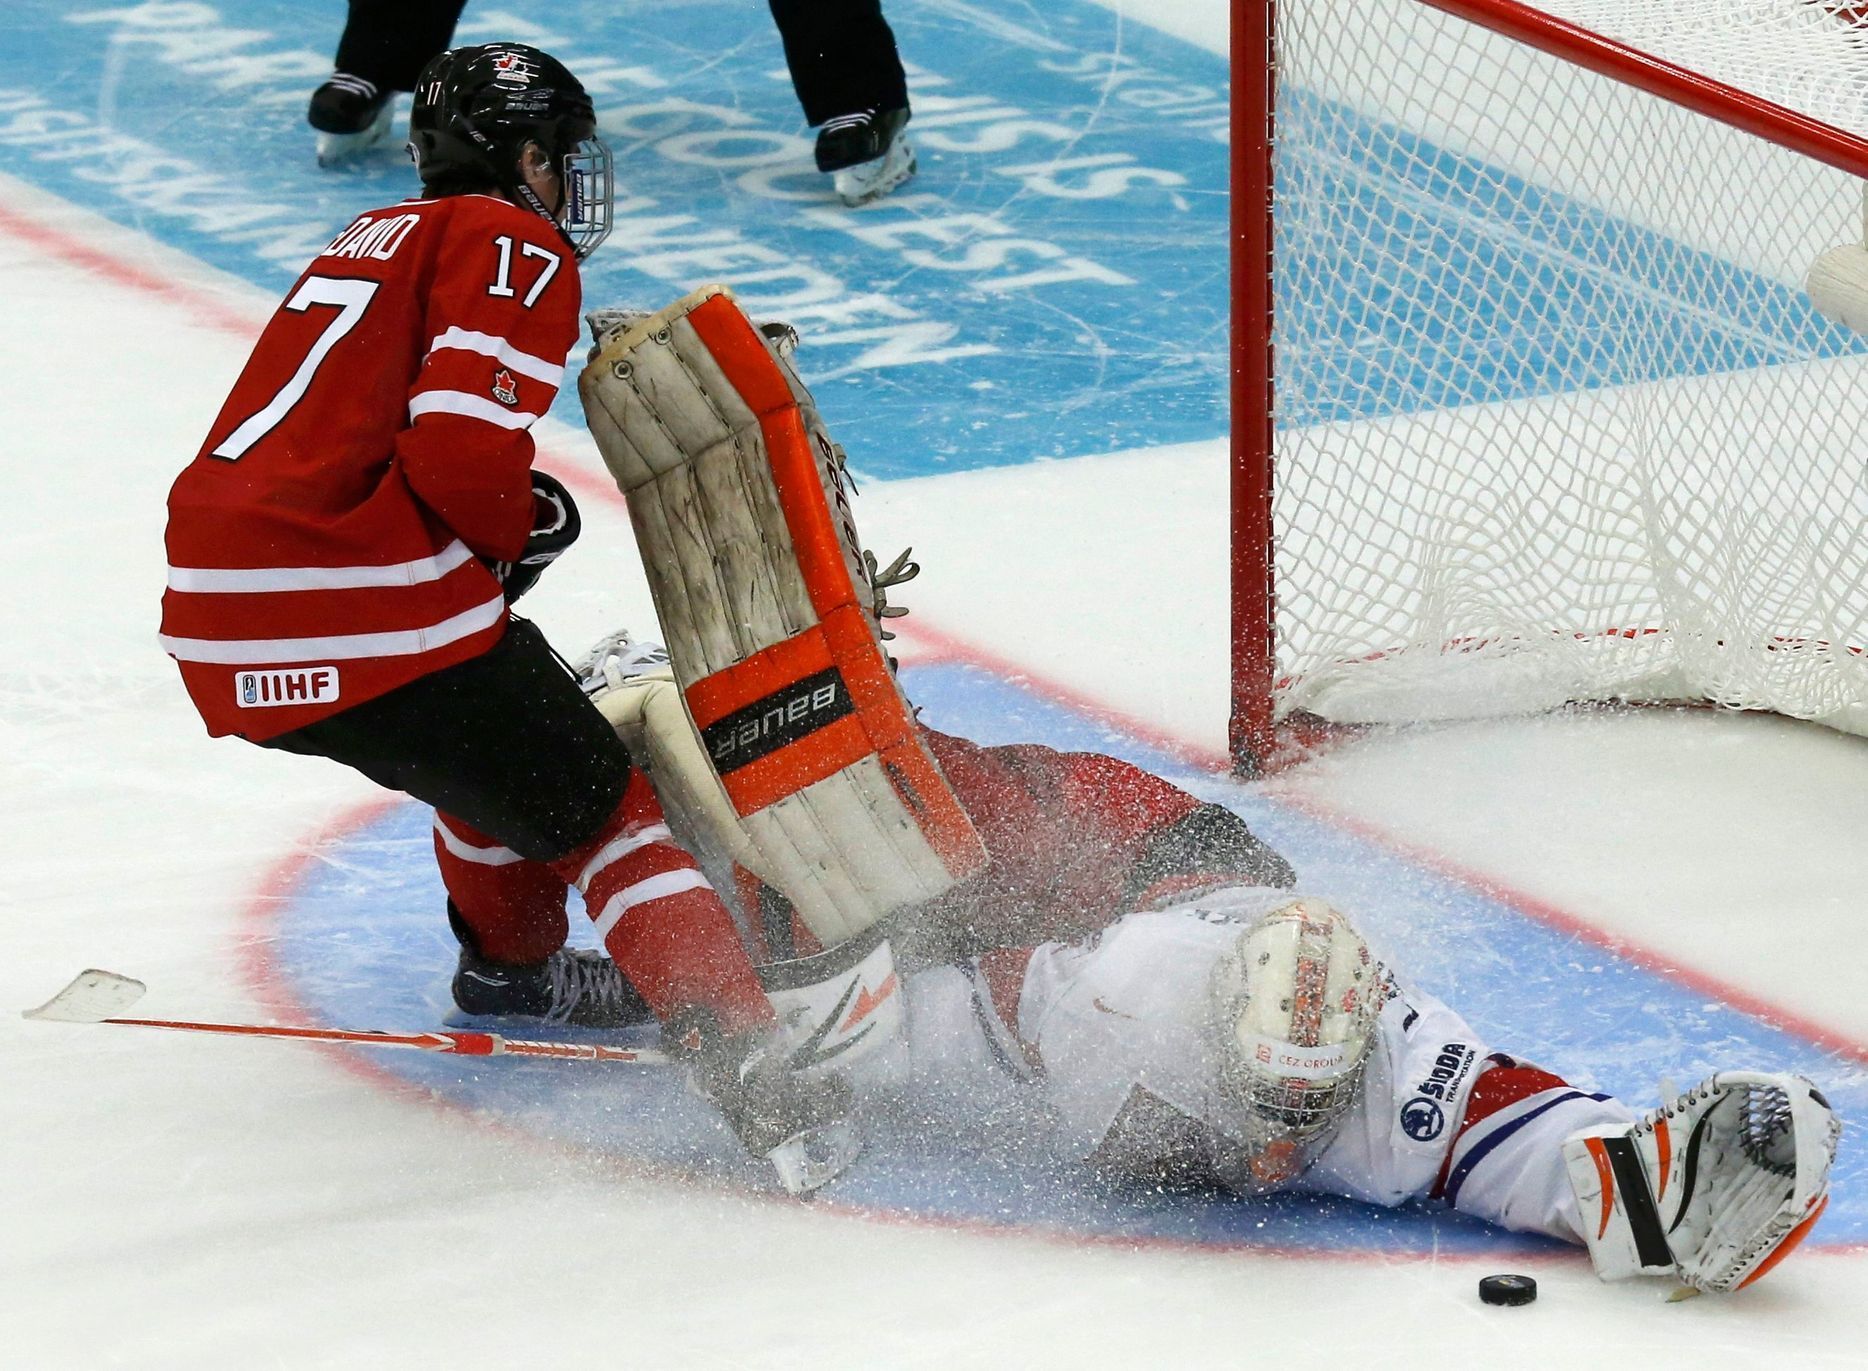 Canada's McDavid is stopped by Czech Republic's goalie Langhammer during the shootout in their IIHF World Junior Championship ice hockey game in Malmo